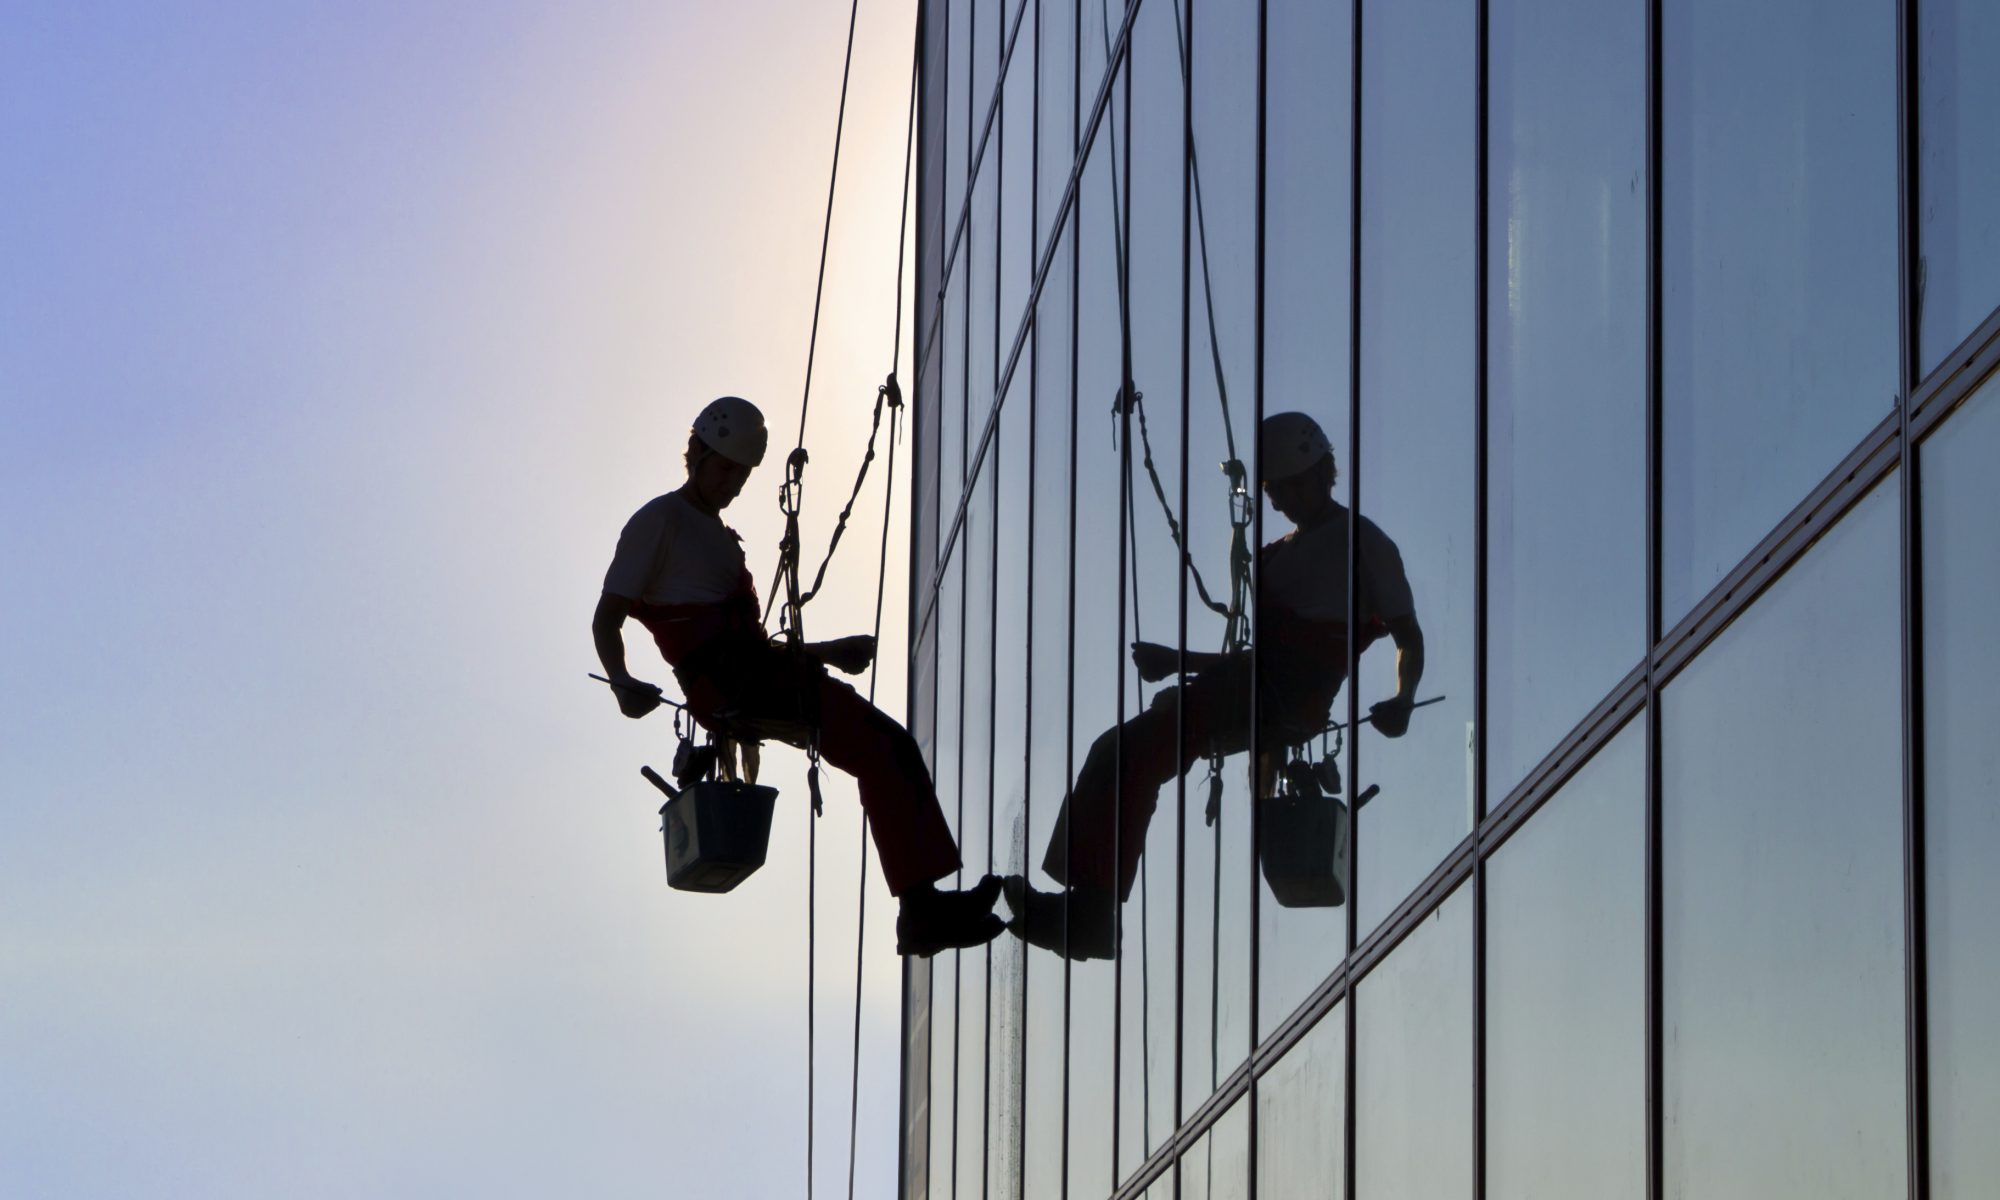 A rope access technician's sihlouette can been seen hanging off the side of a highrise building as he prepares his squeegee to wash and clean the windows in front of him.